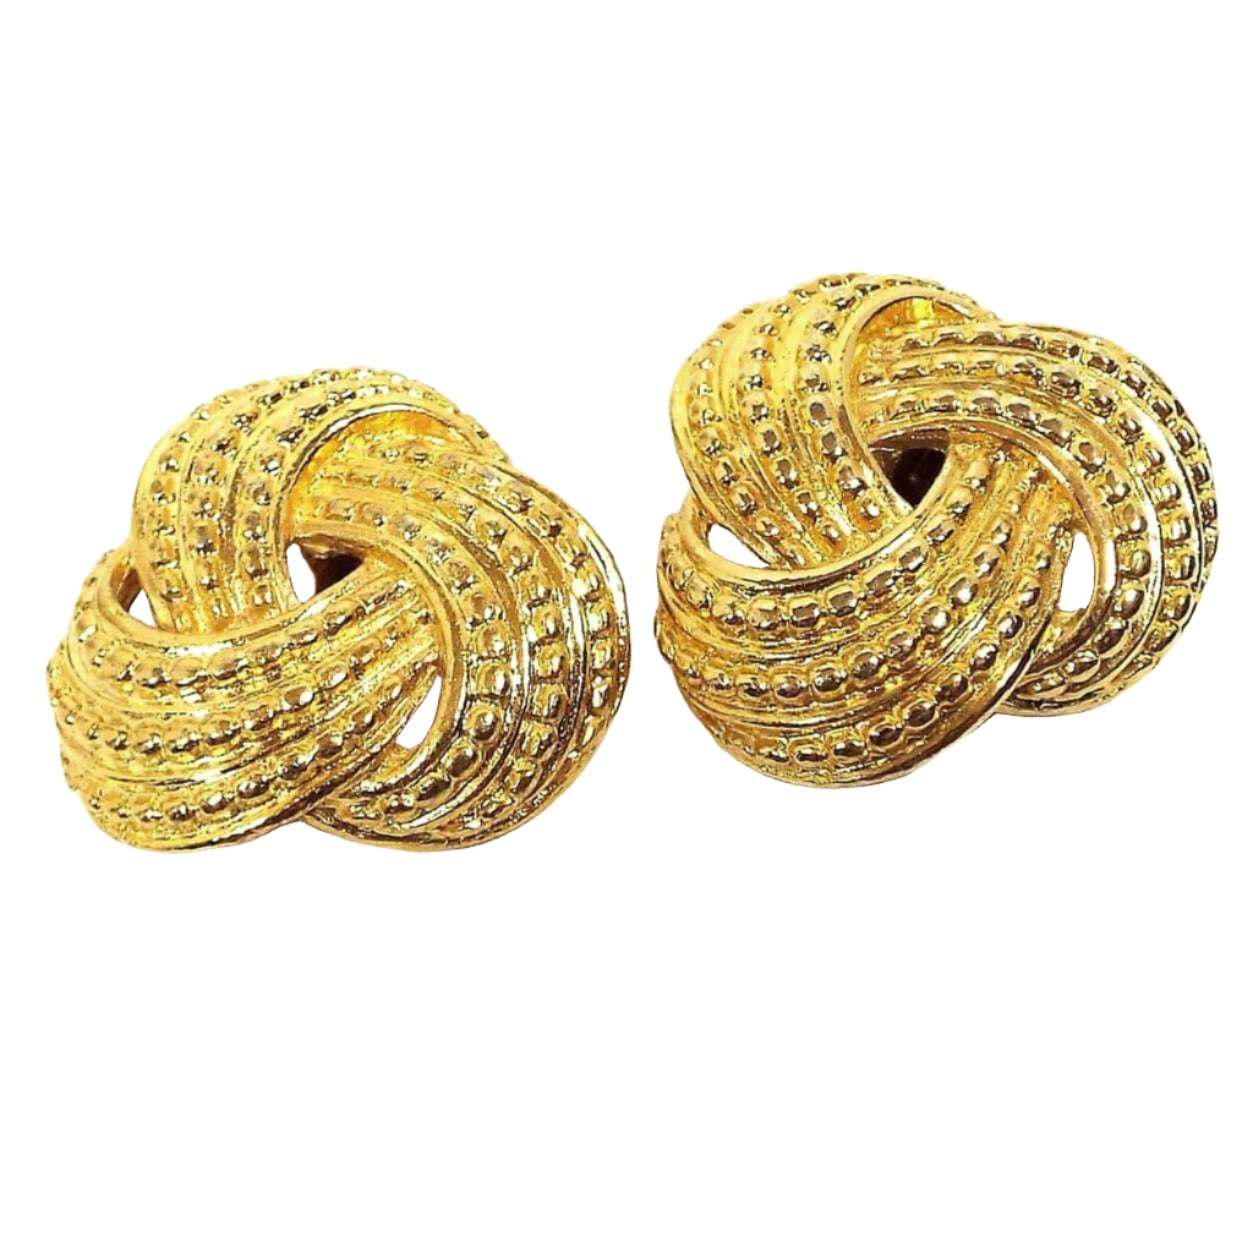 Front view of the retro vintage shoe clips. The metal is gold tone plated in color. They are shaped like twisted knots and have a bumpy textured pattern on them.